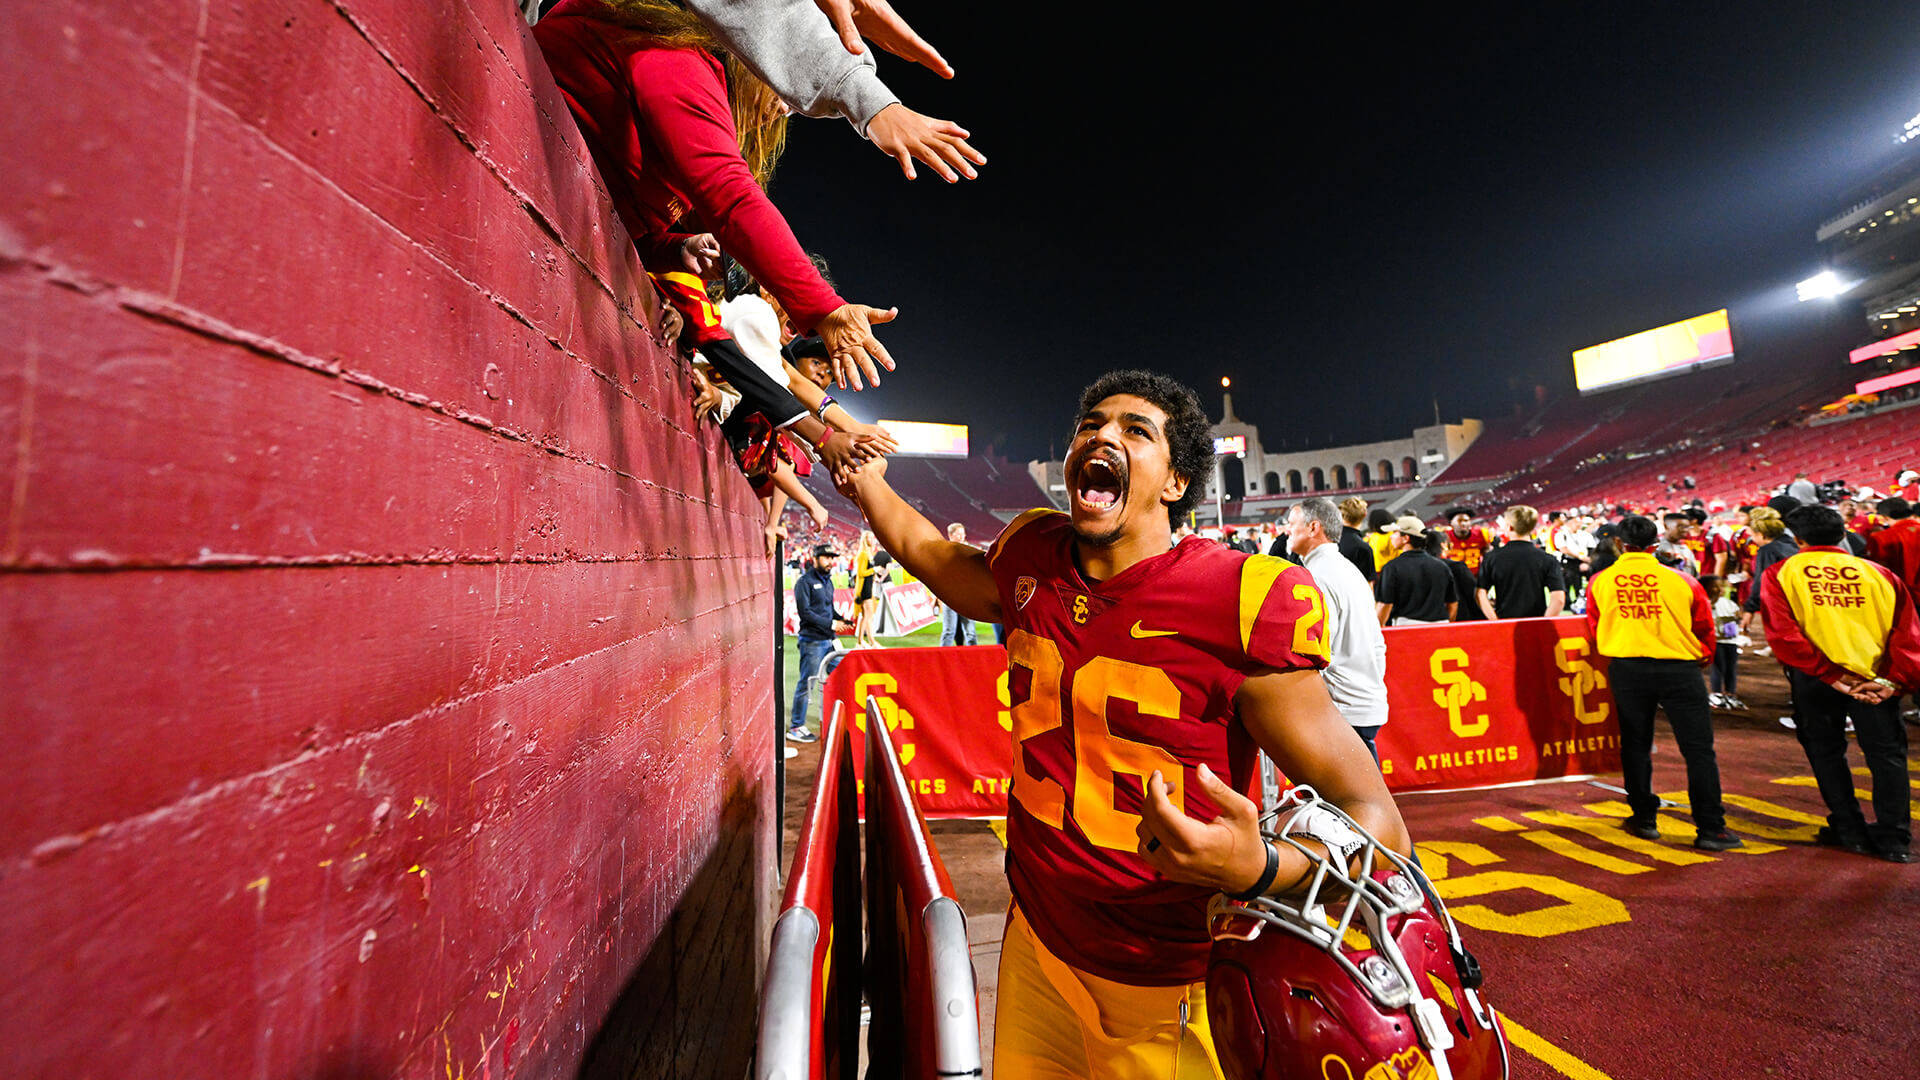 Usc Football Player And Fans